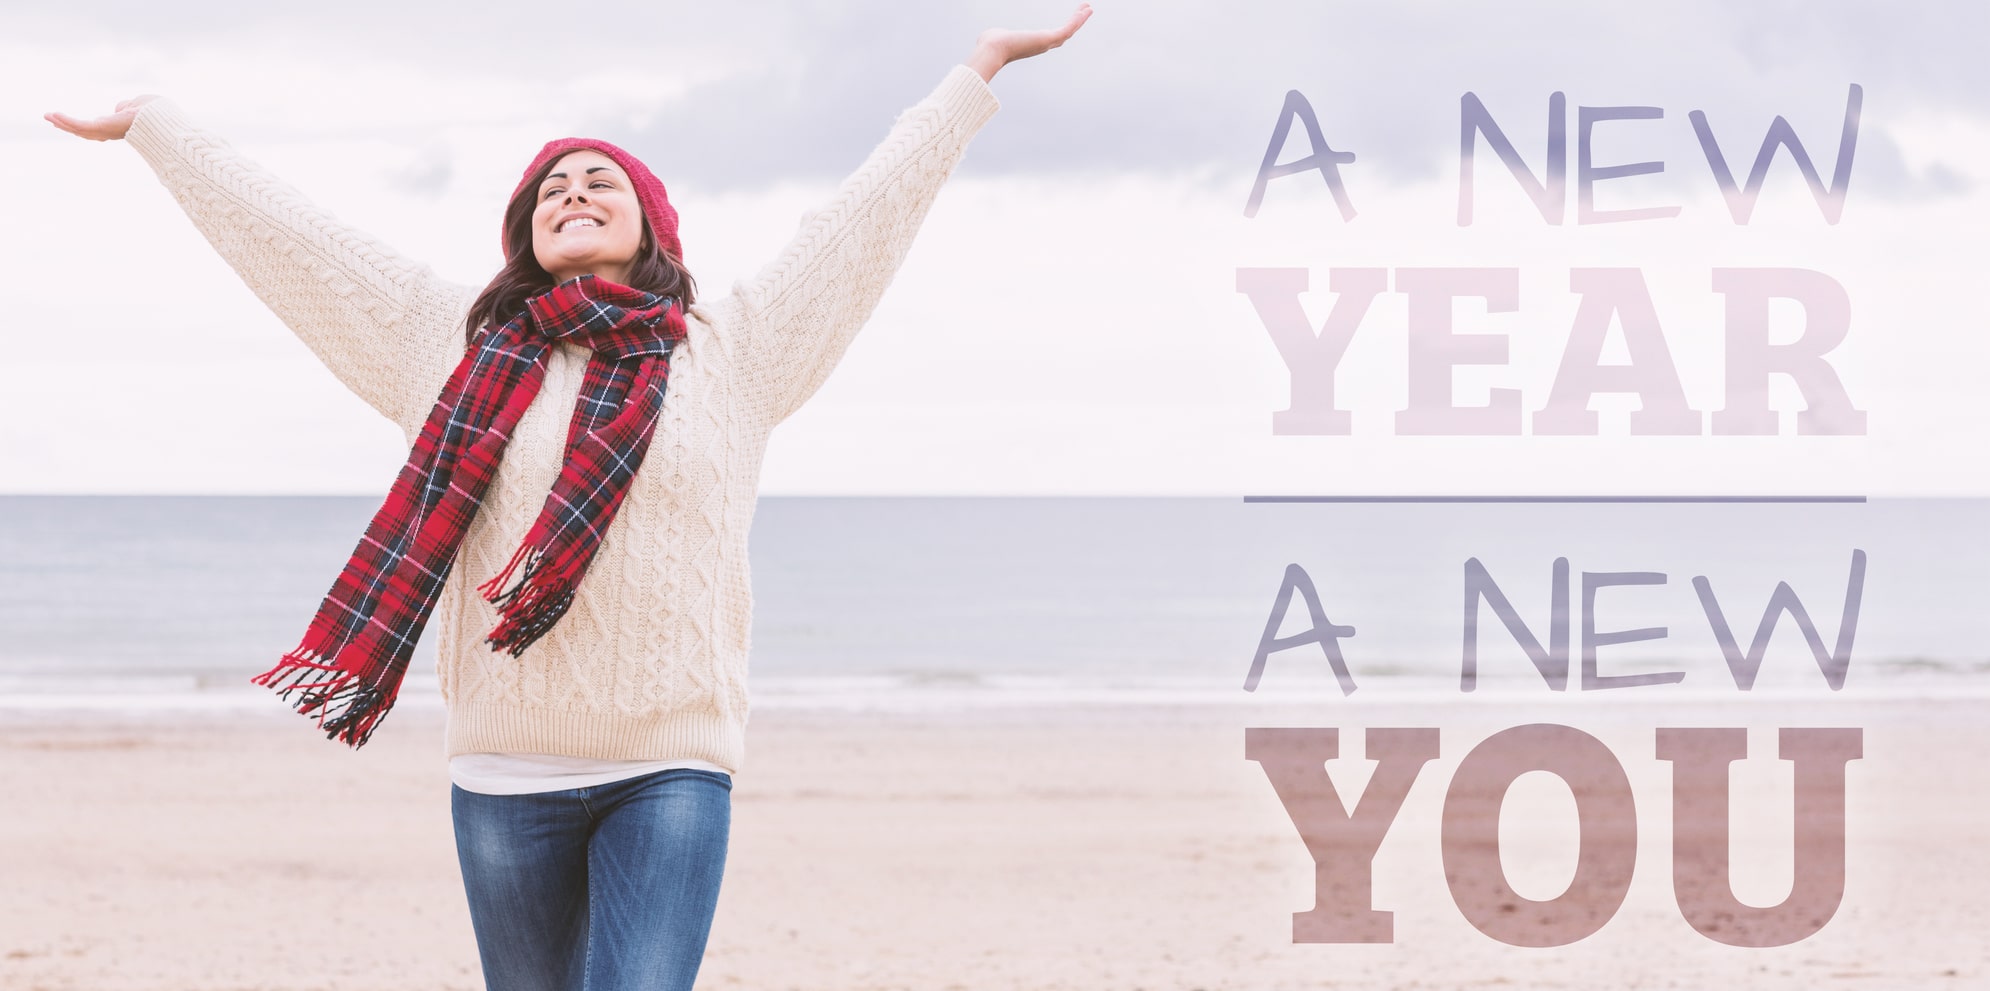 Find out if "New Year, New You" will create a better you